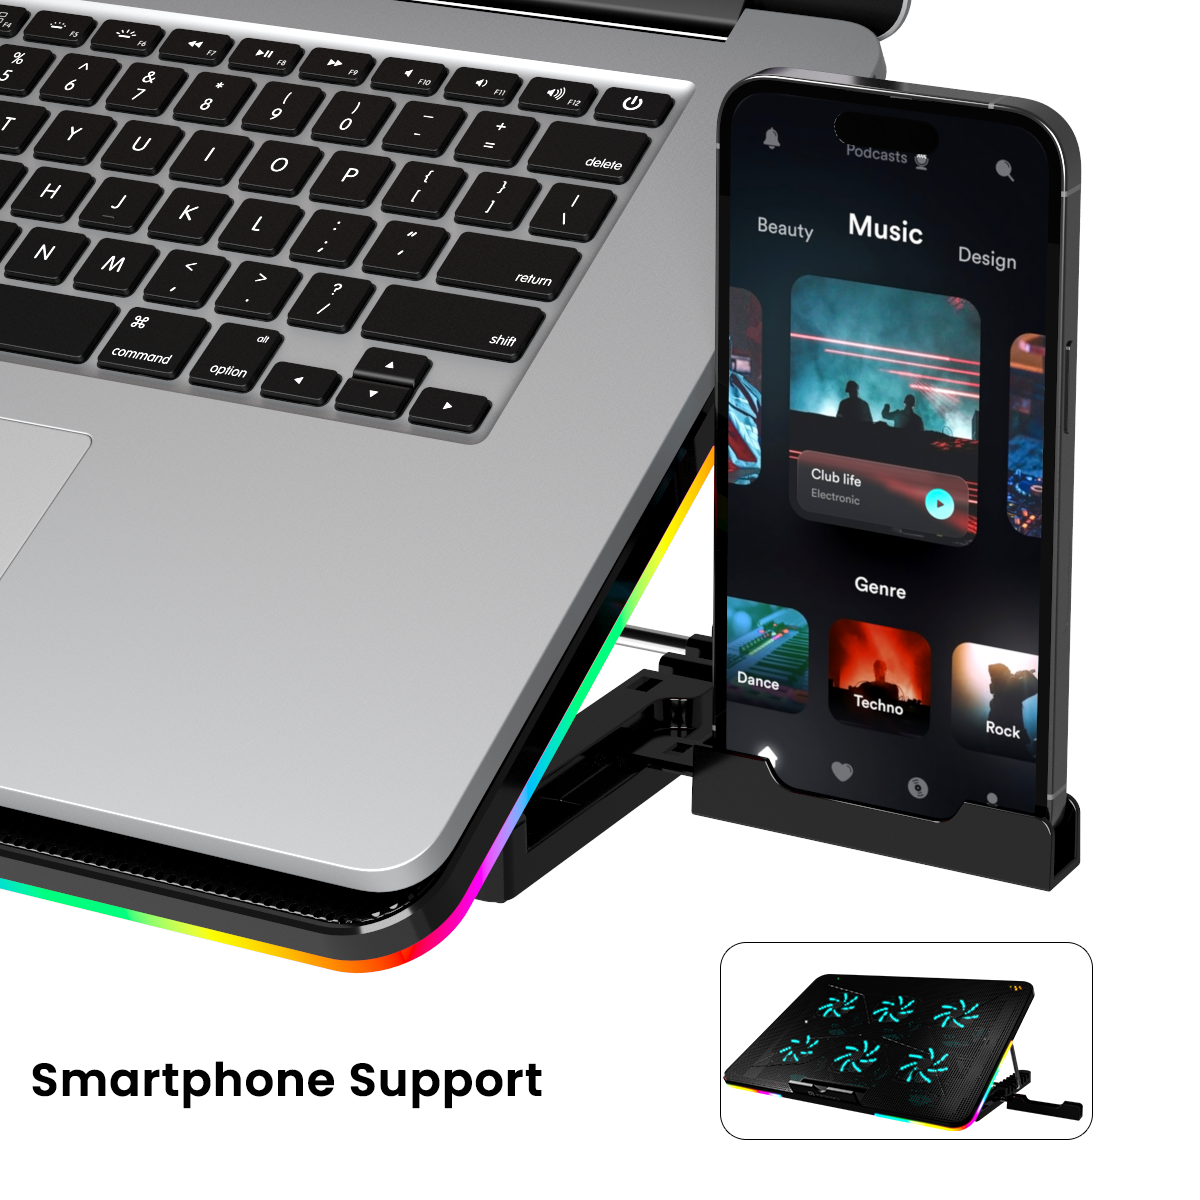 Black Portronics My Buddy Air Cooling Pad: Portable Laptop stand with smartphone holder